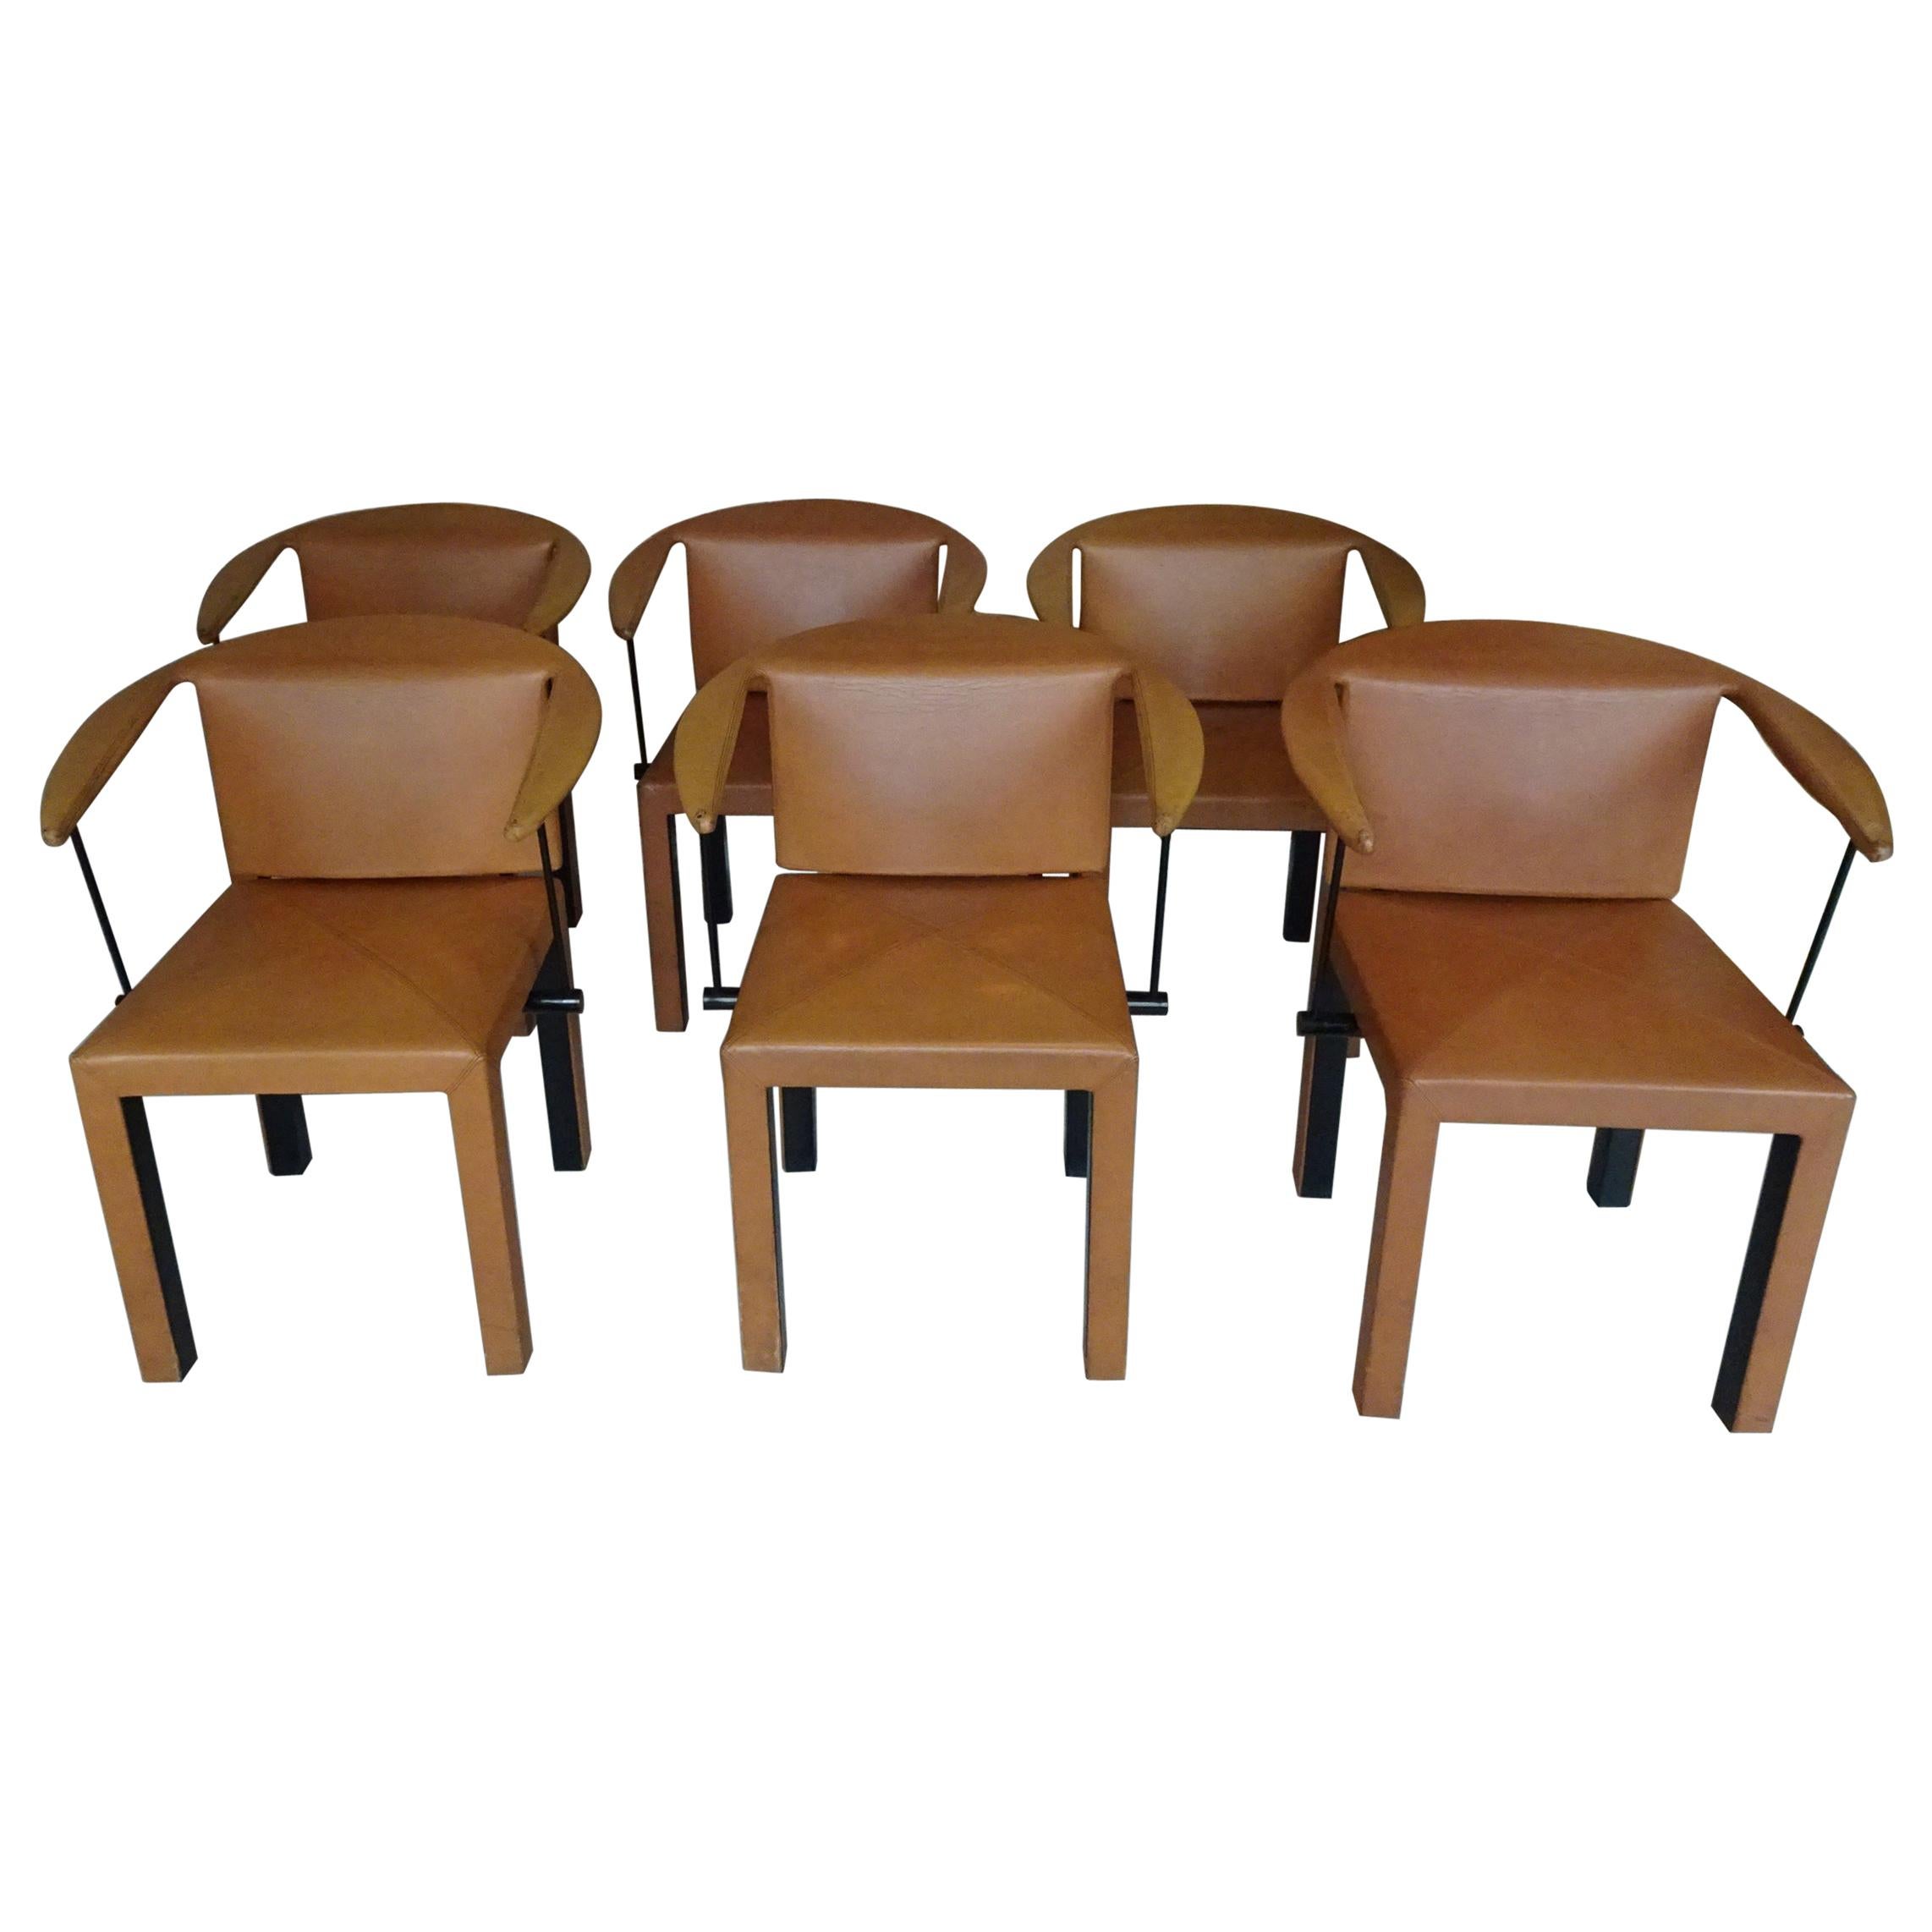 Paolo Piva Arcella Dining Room Chairs